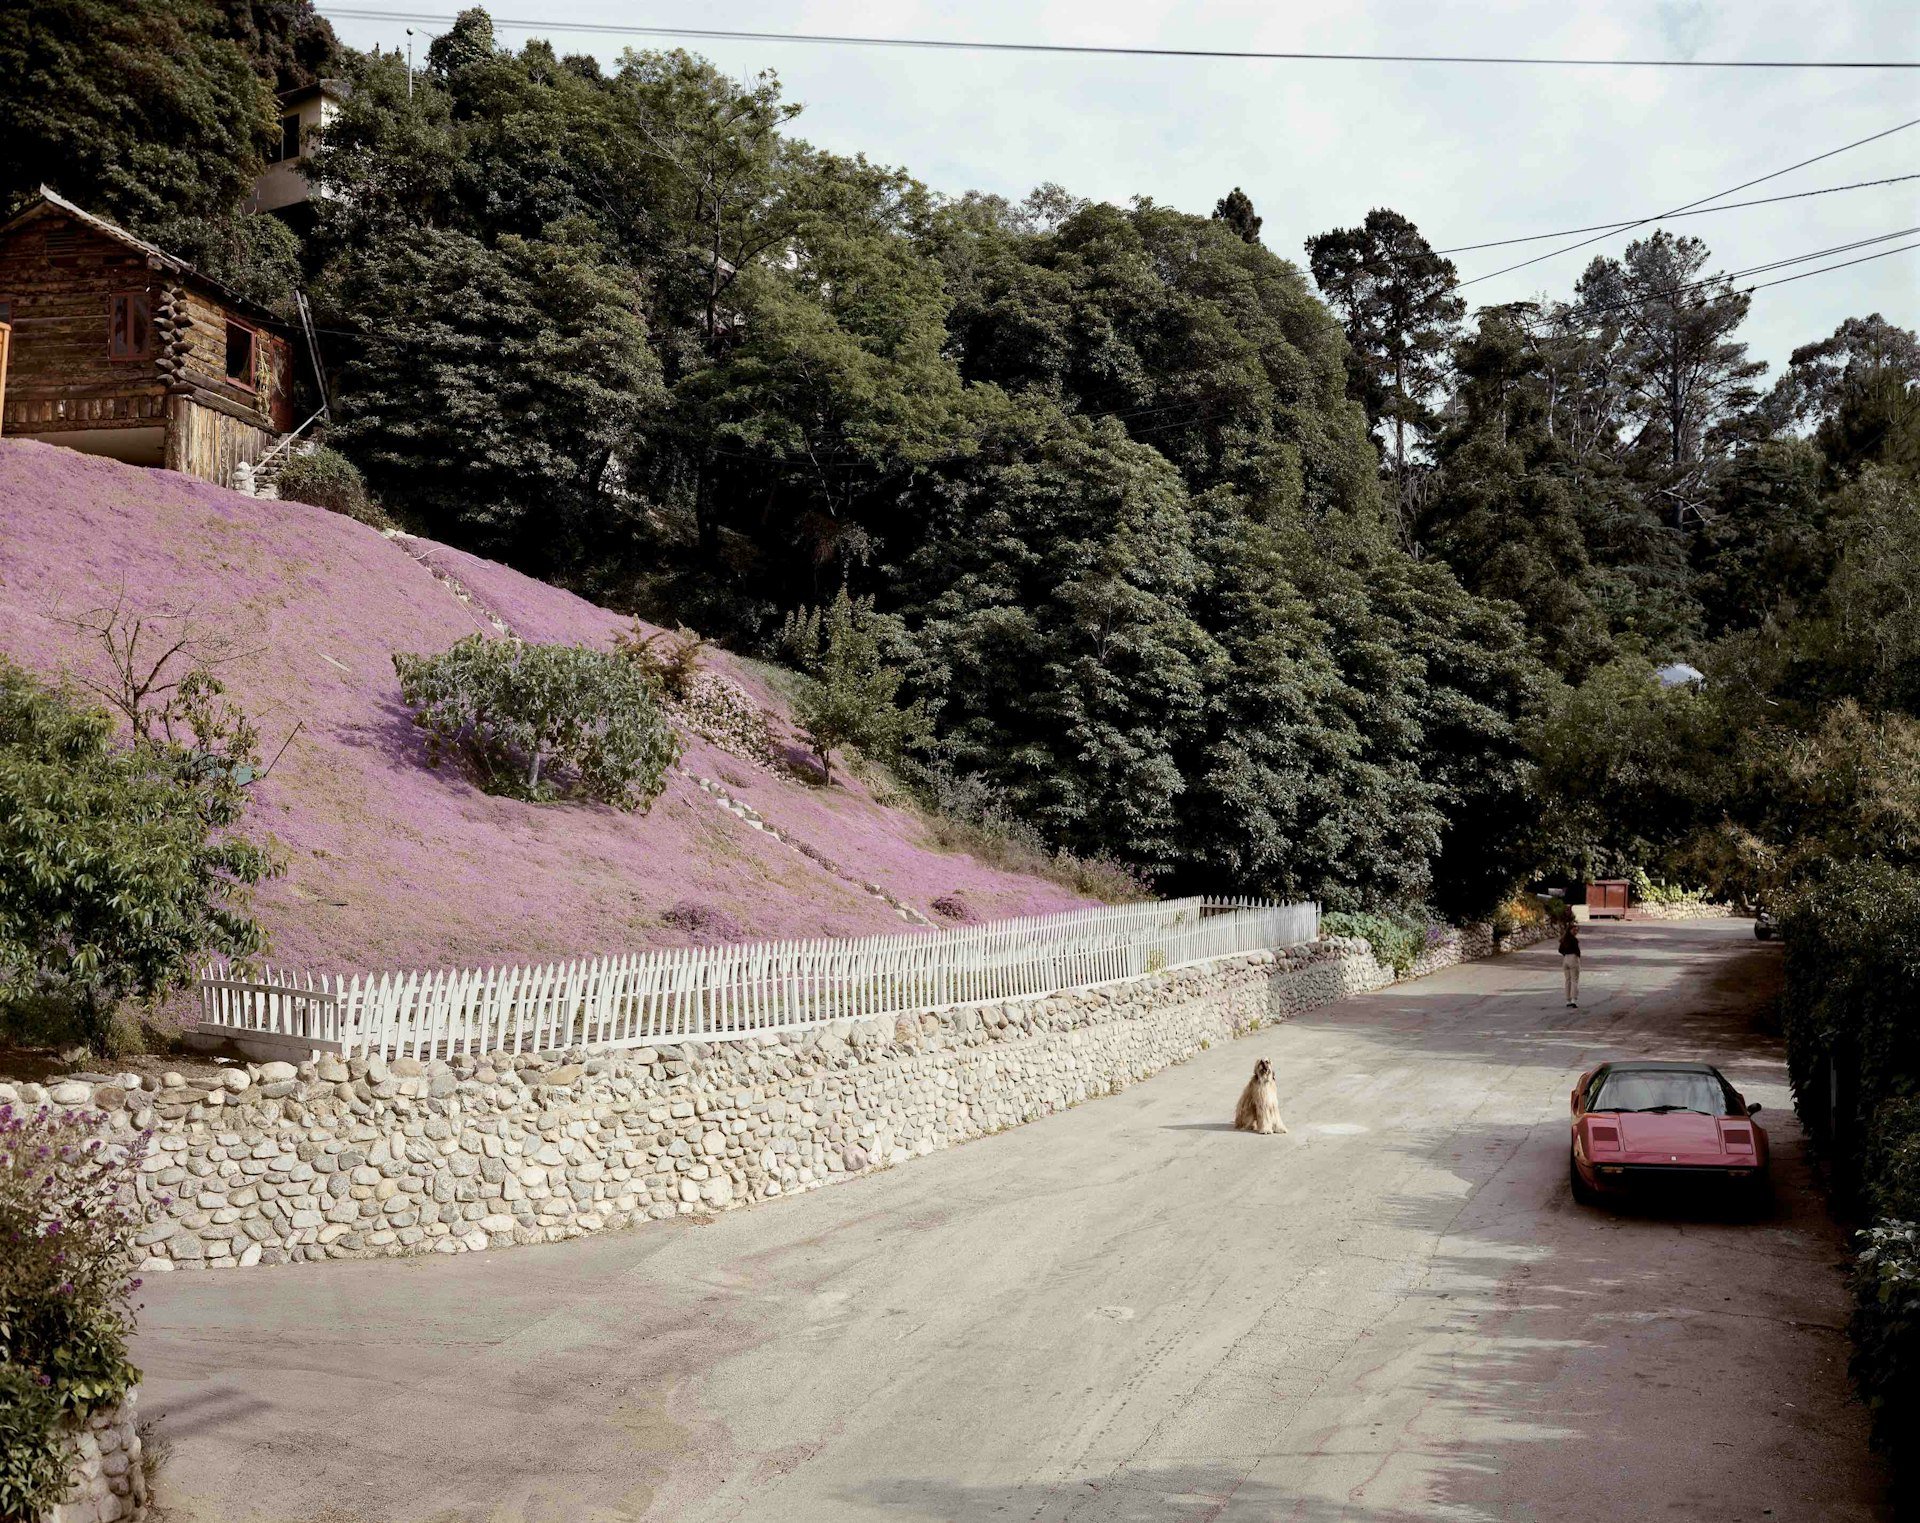 Rustic Canyon, Santa Monica, California, May 1979 © Joel Sternfeld courtesy Luhring Augustine Gallery and Beetles + Huxley Gallery